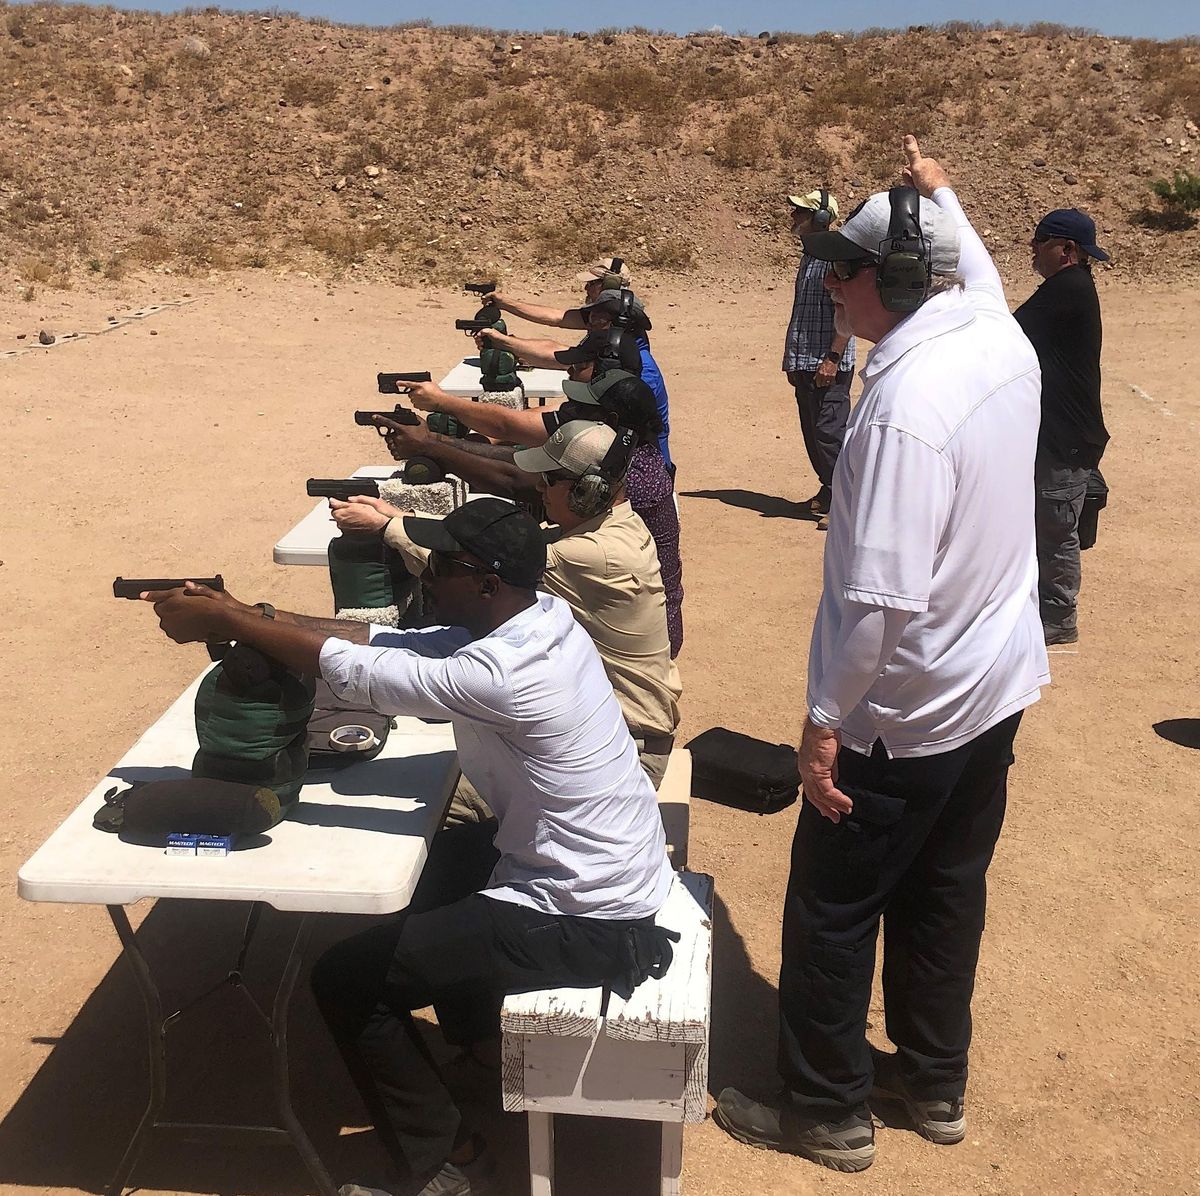 NRA Basics of PISTOL Shooting Course